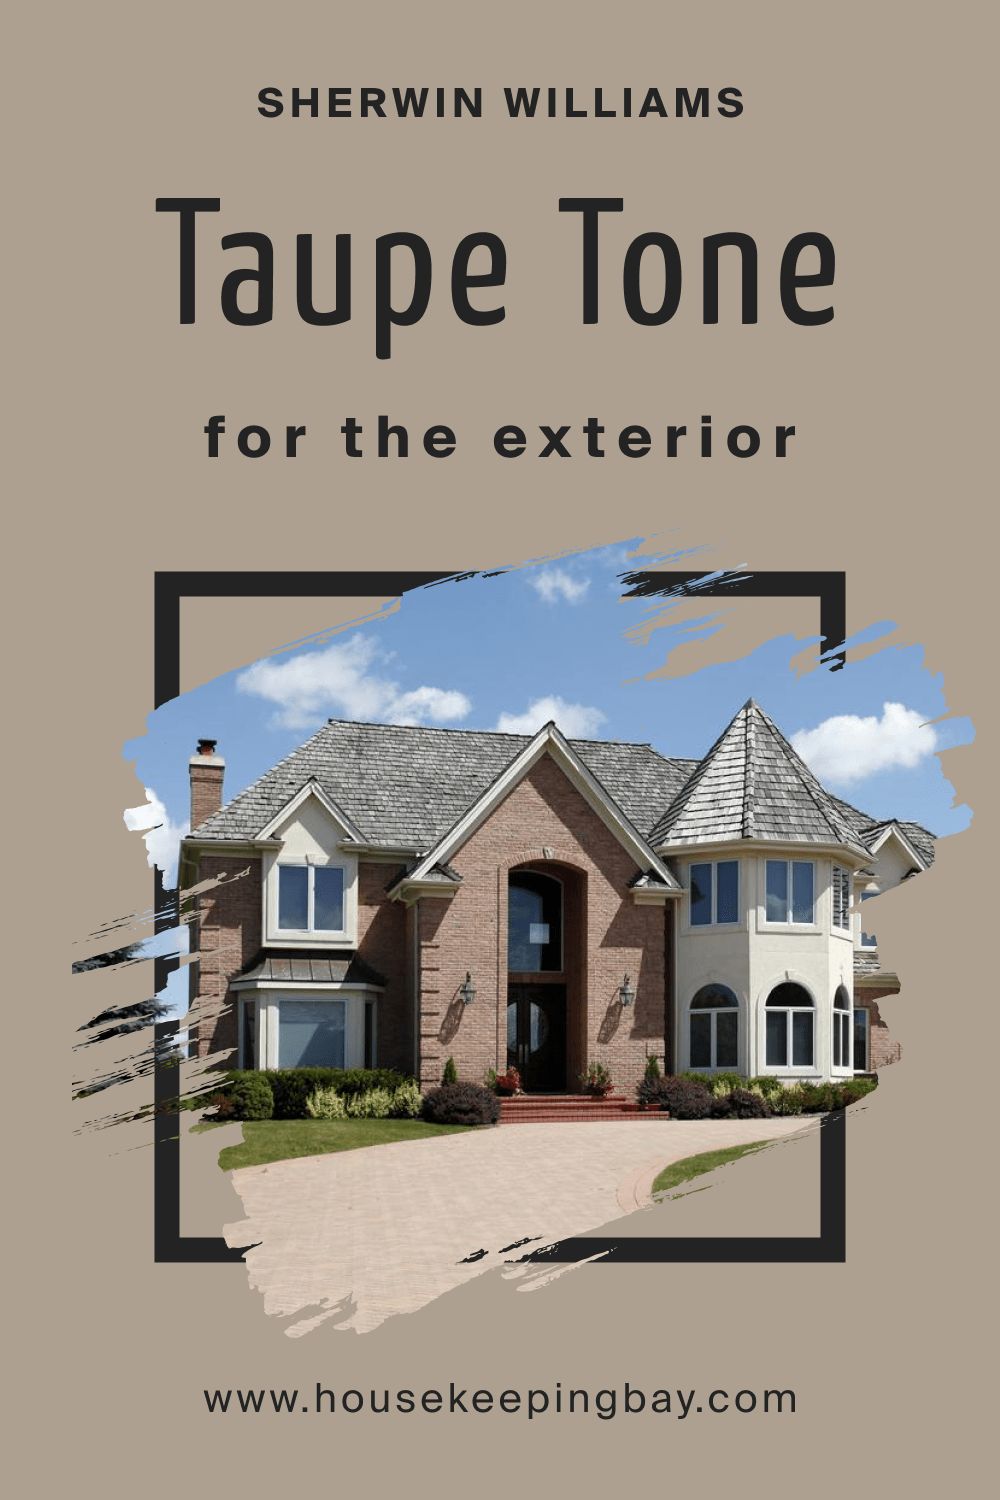 Sherwin Williams. Taupe Tone SW 7633 For the exterior